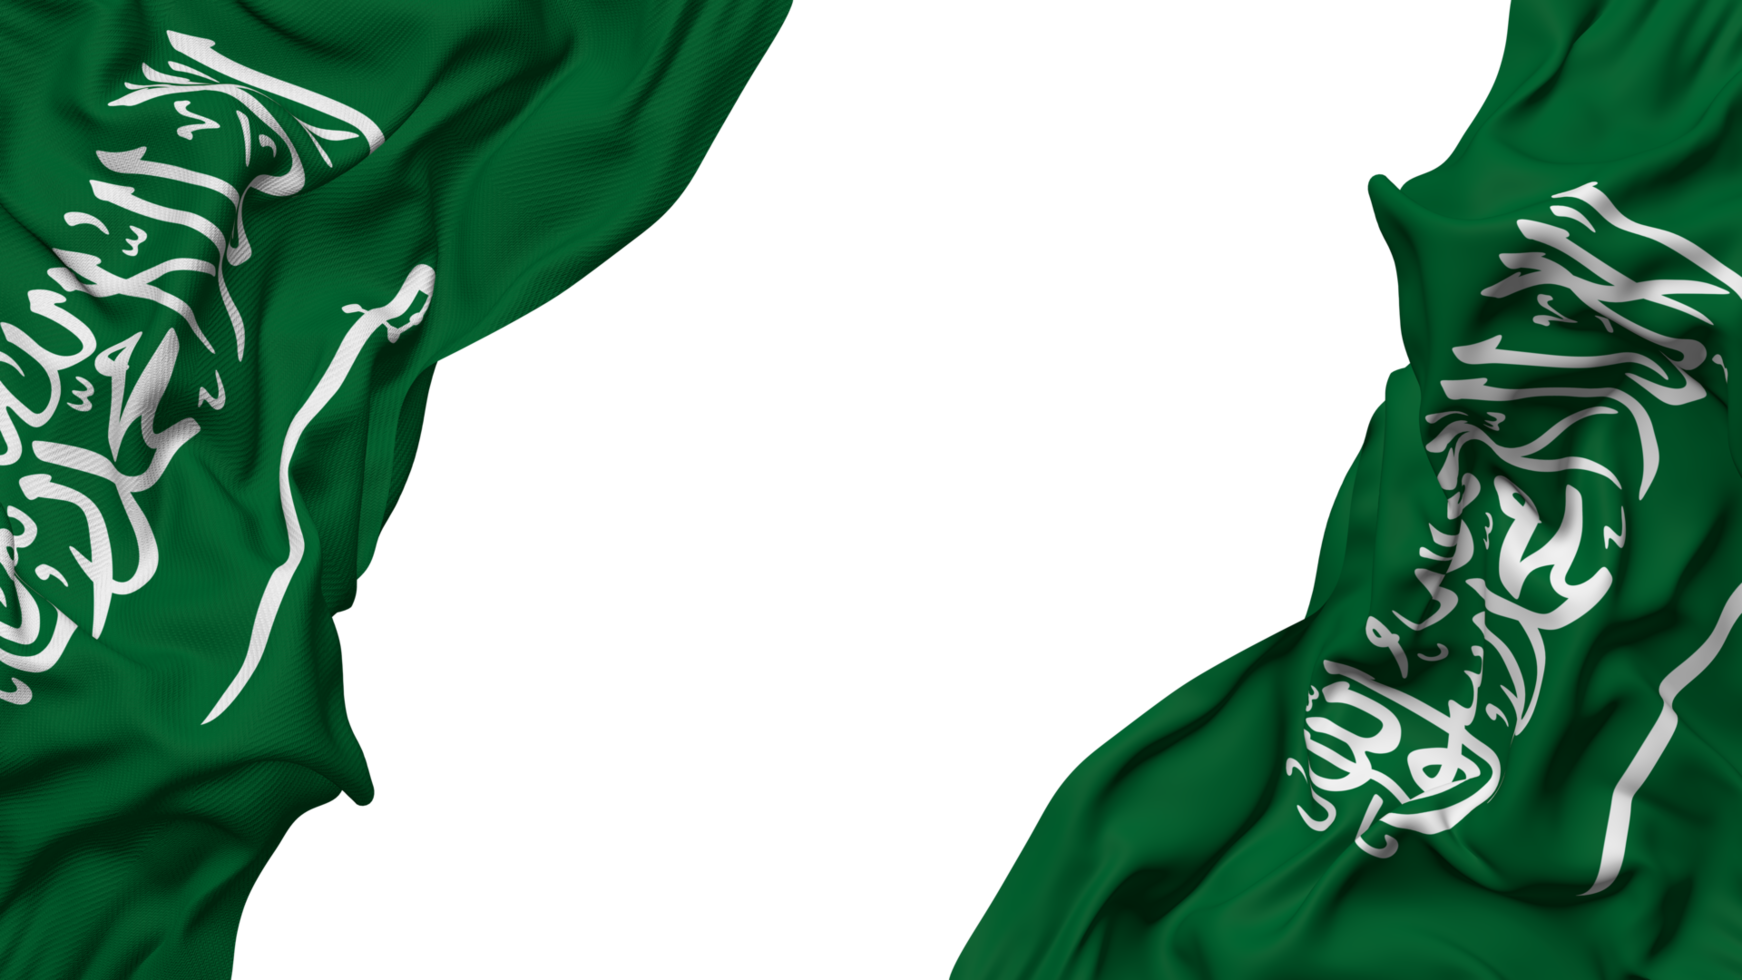 Saudi Arabia Flag Cloth Wave Banner in the Corner with Bump and Plain Texture, Isolated, 3D Rendering png